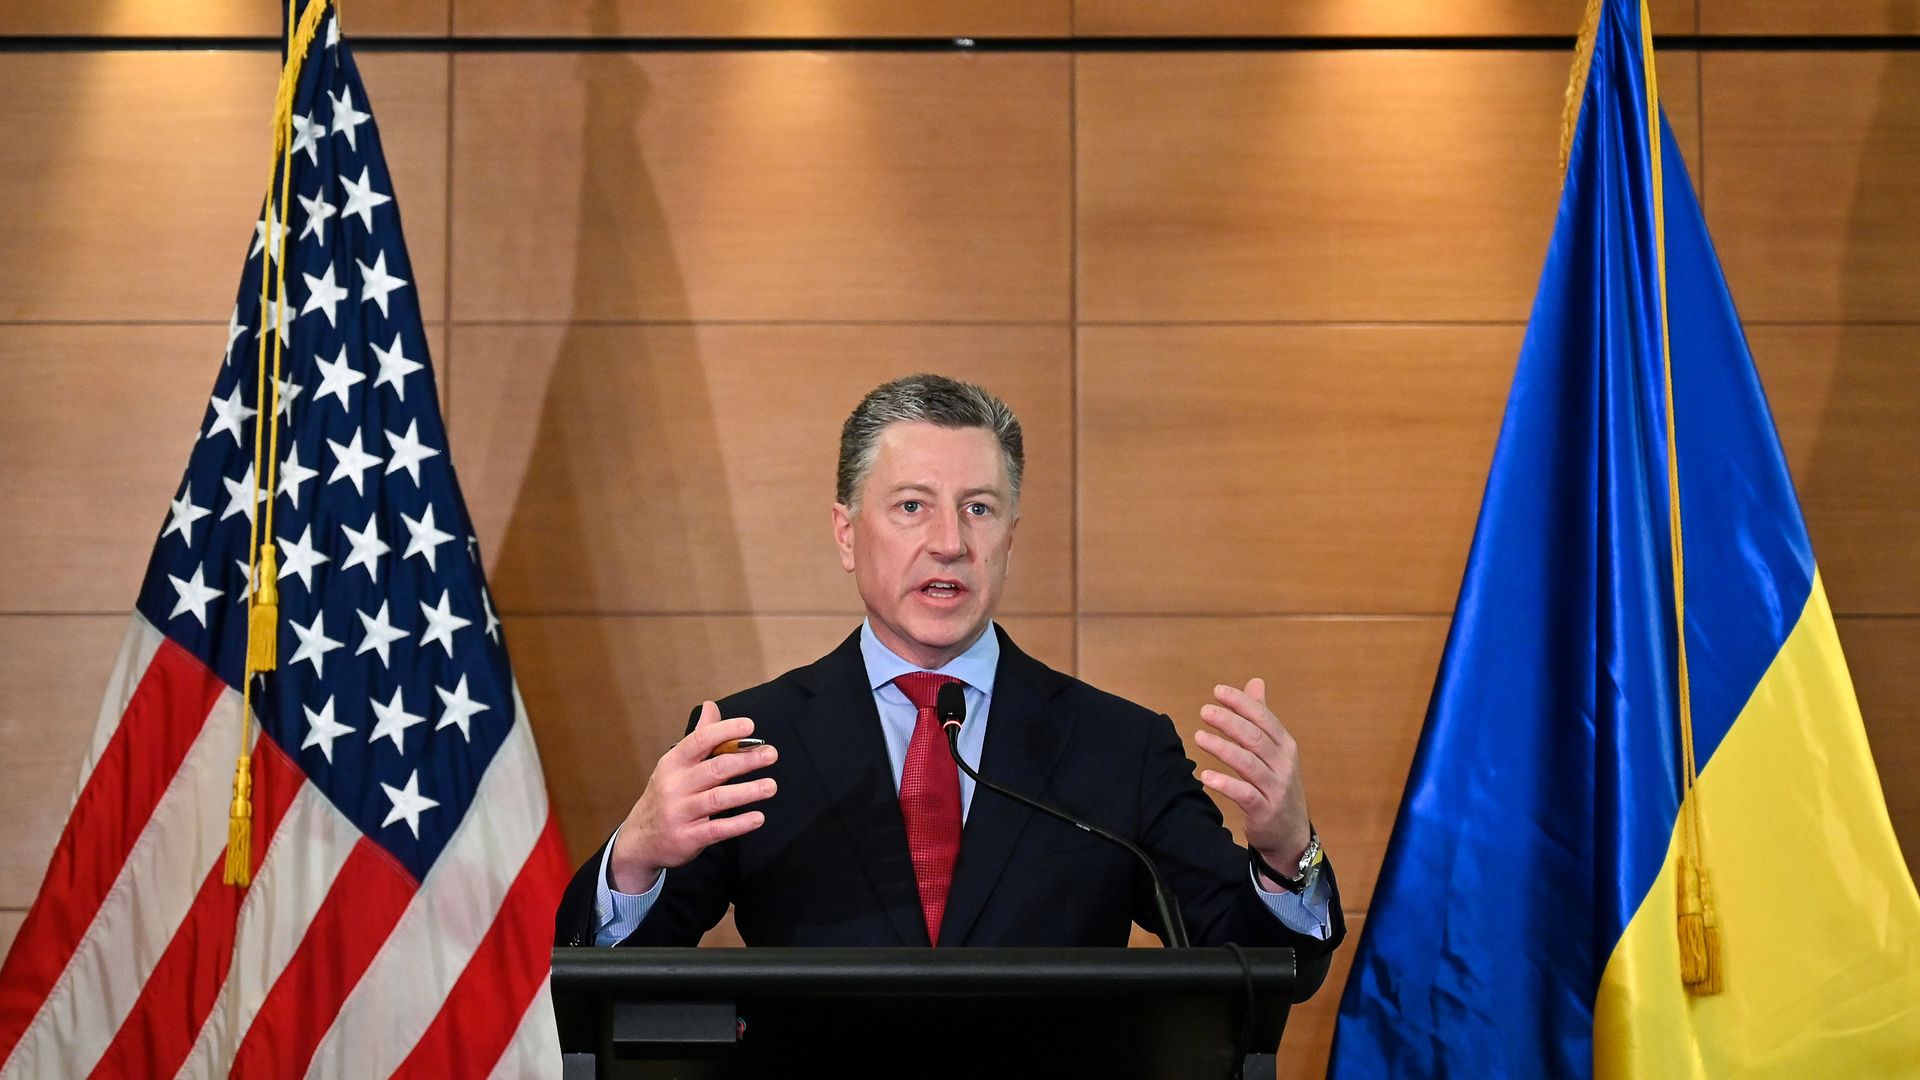 In this image, Kurt speaks at a podium between two flags.